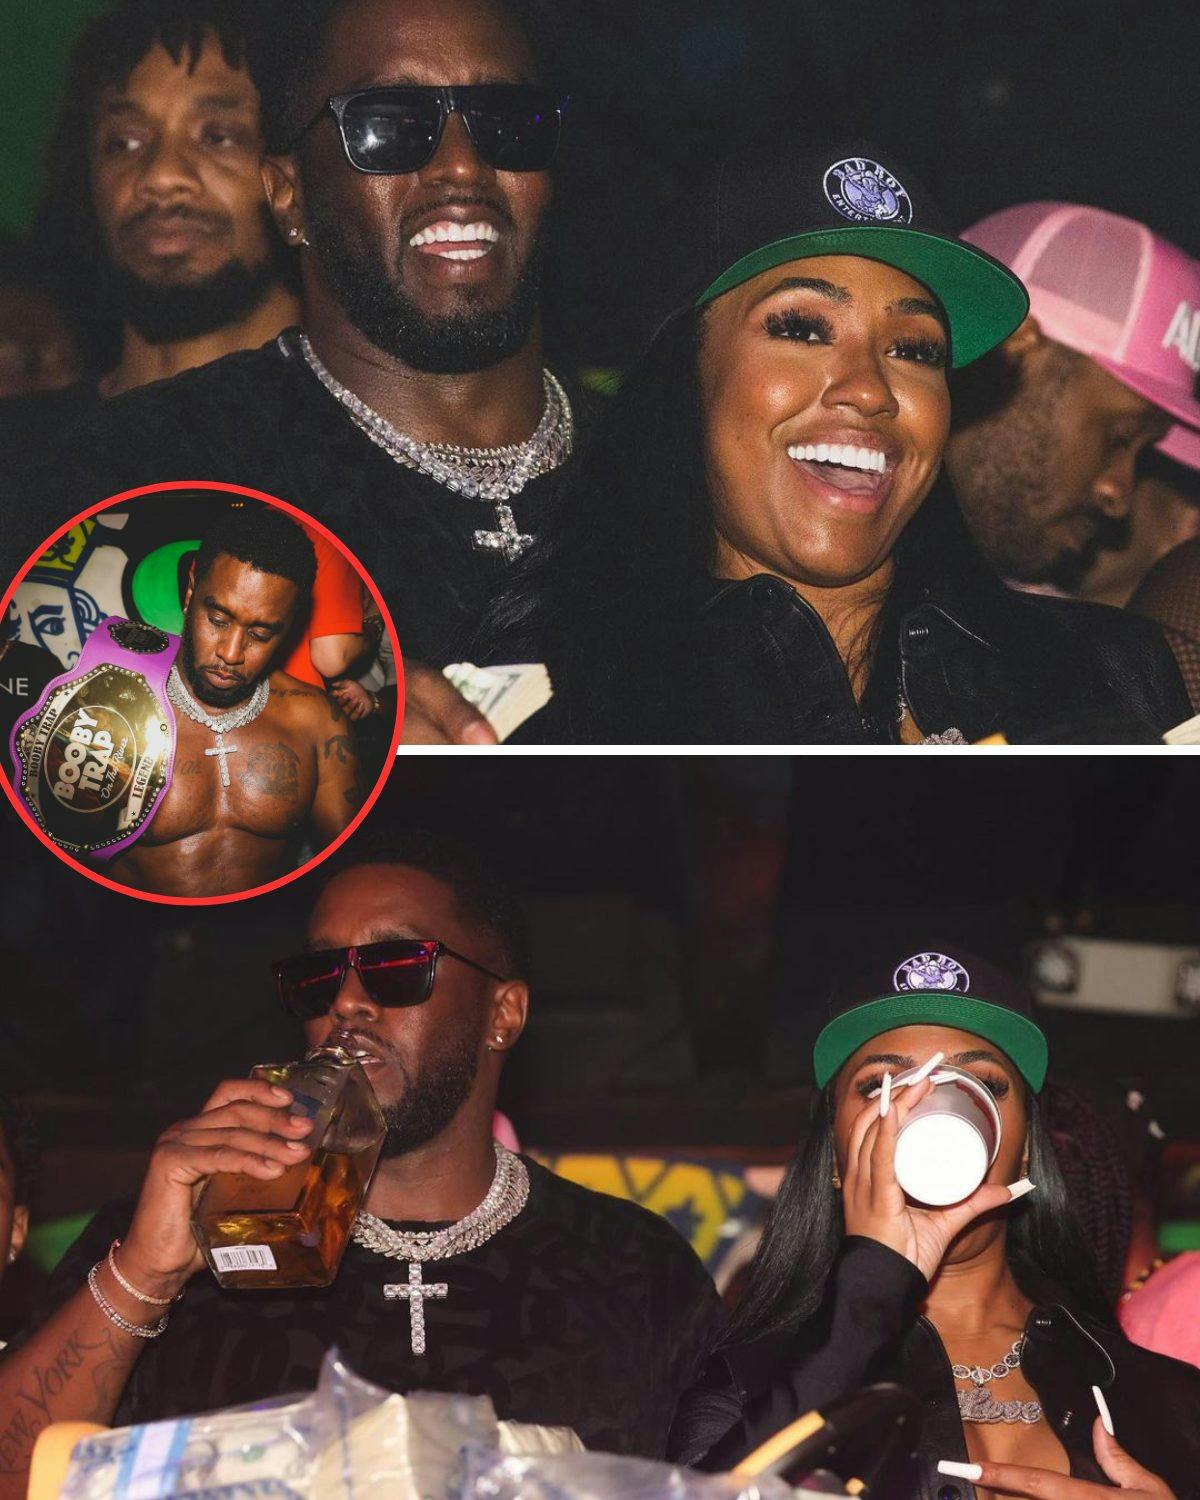 Cover Image for In a well-known club, Diddy was having fun with Yung Miami while sporting the “Trap Boy” insignia.